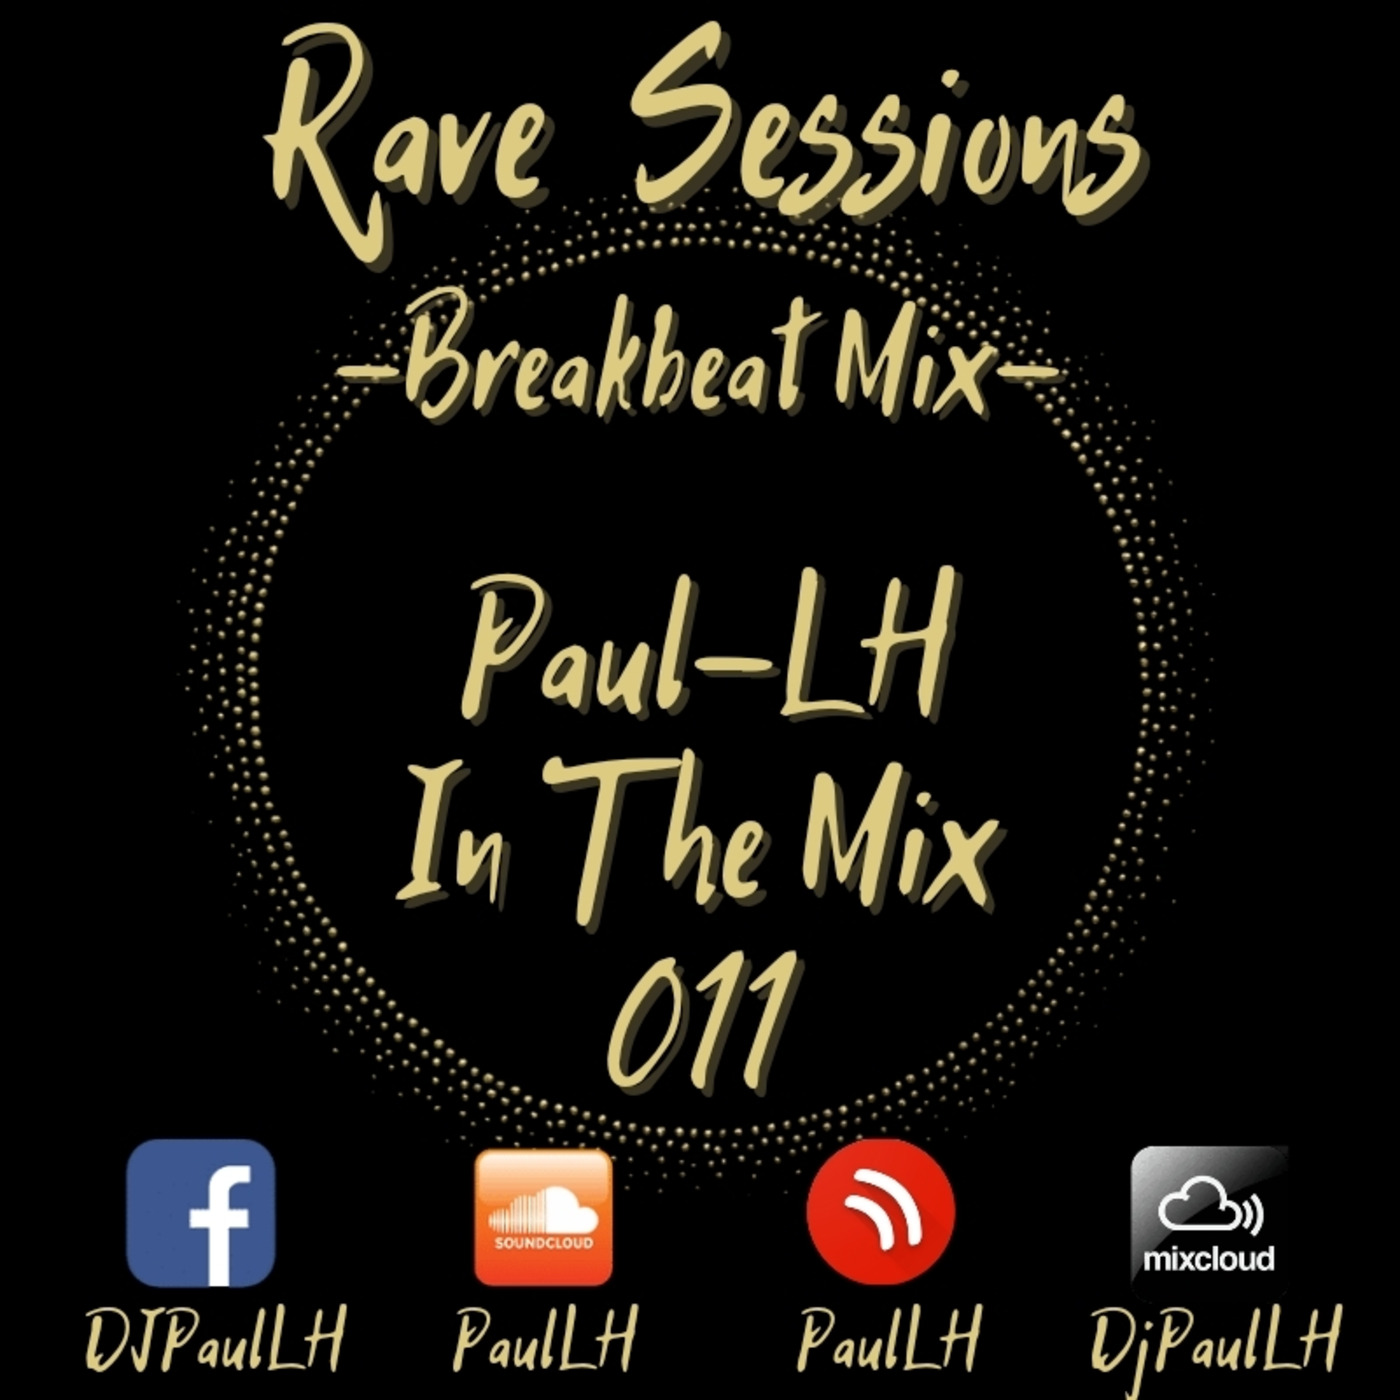 Rave Sessions 011 (Breakbeat Mix)